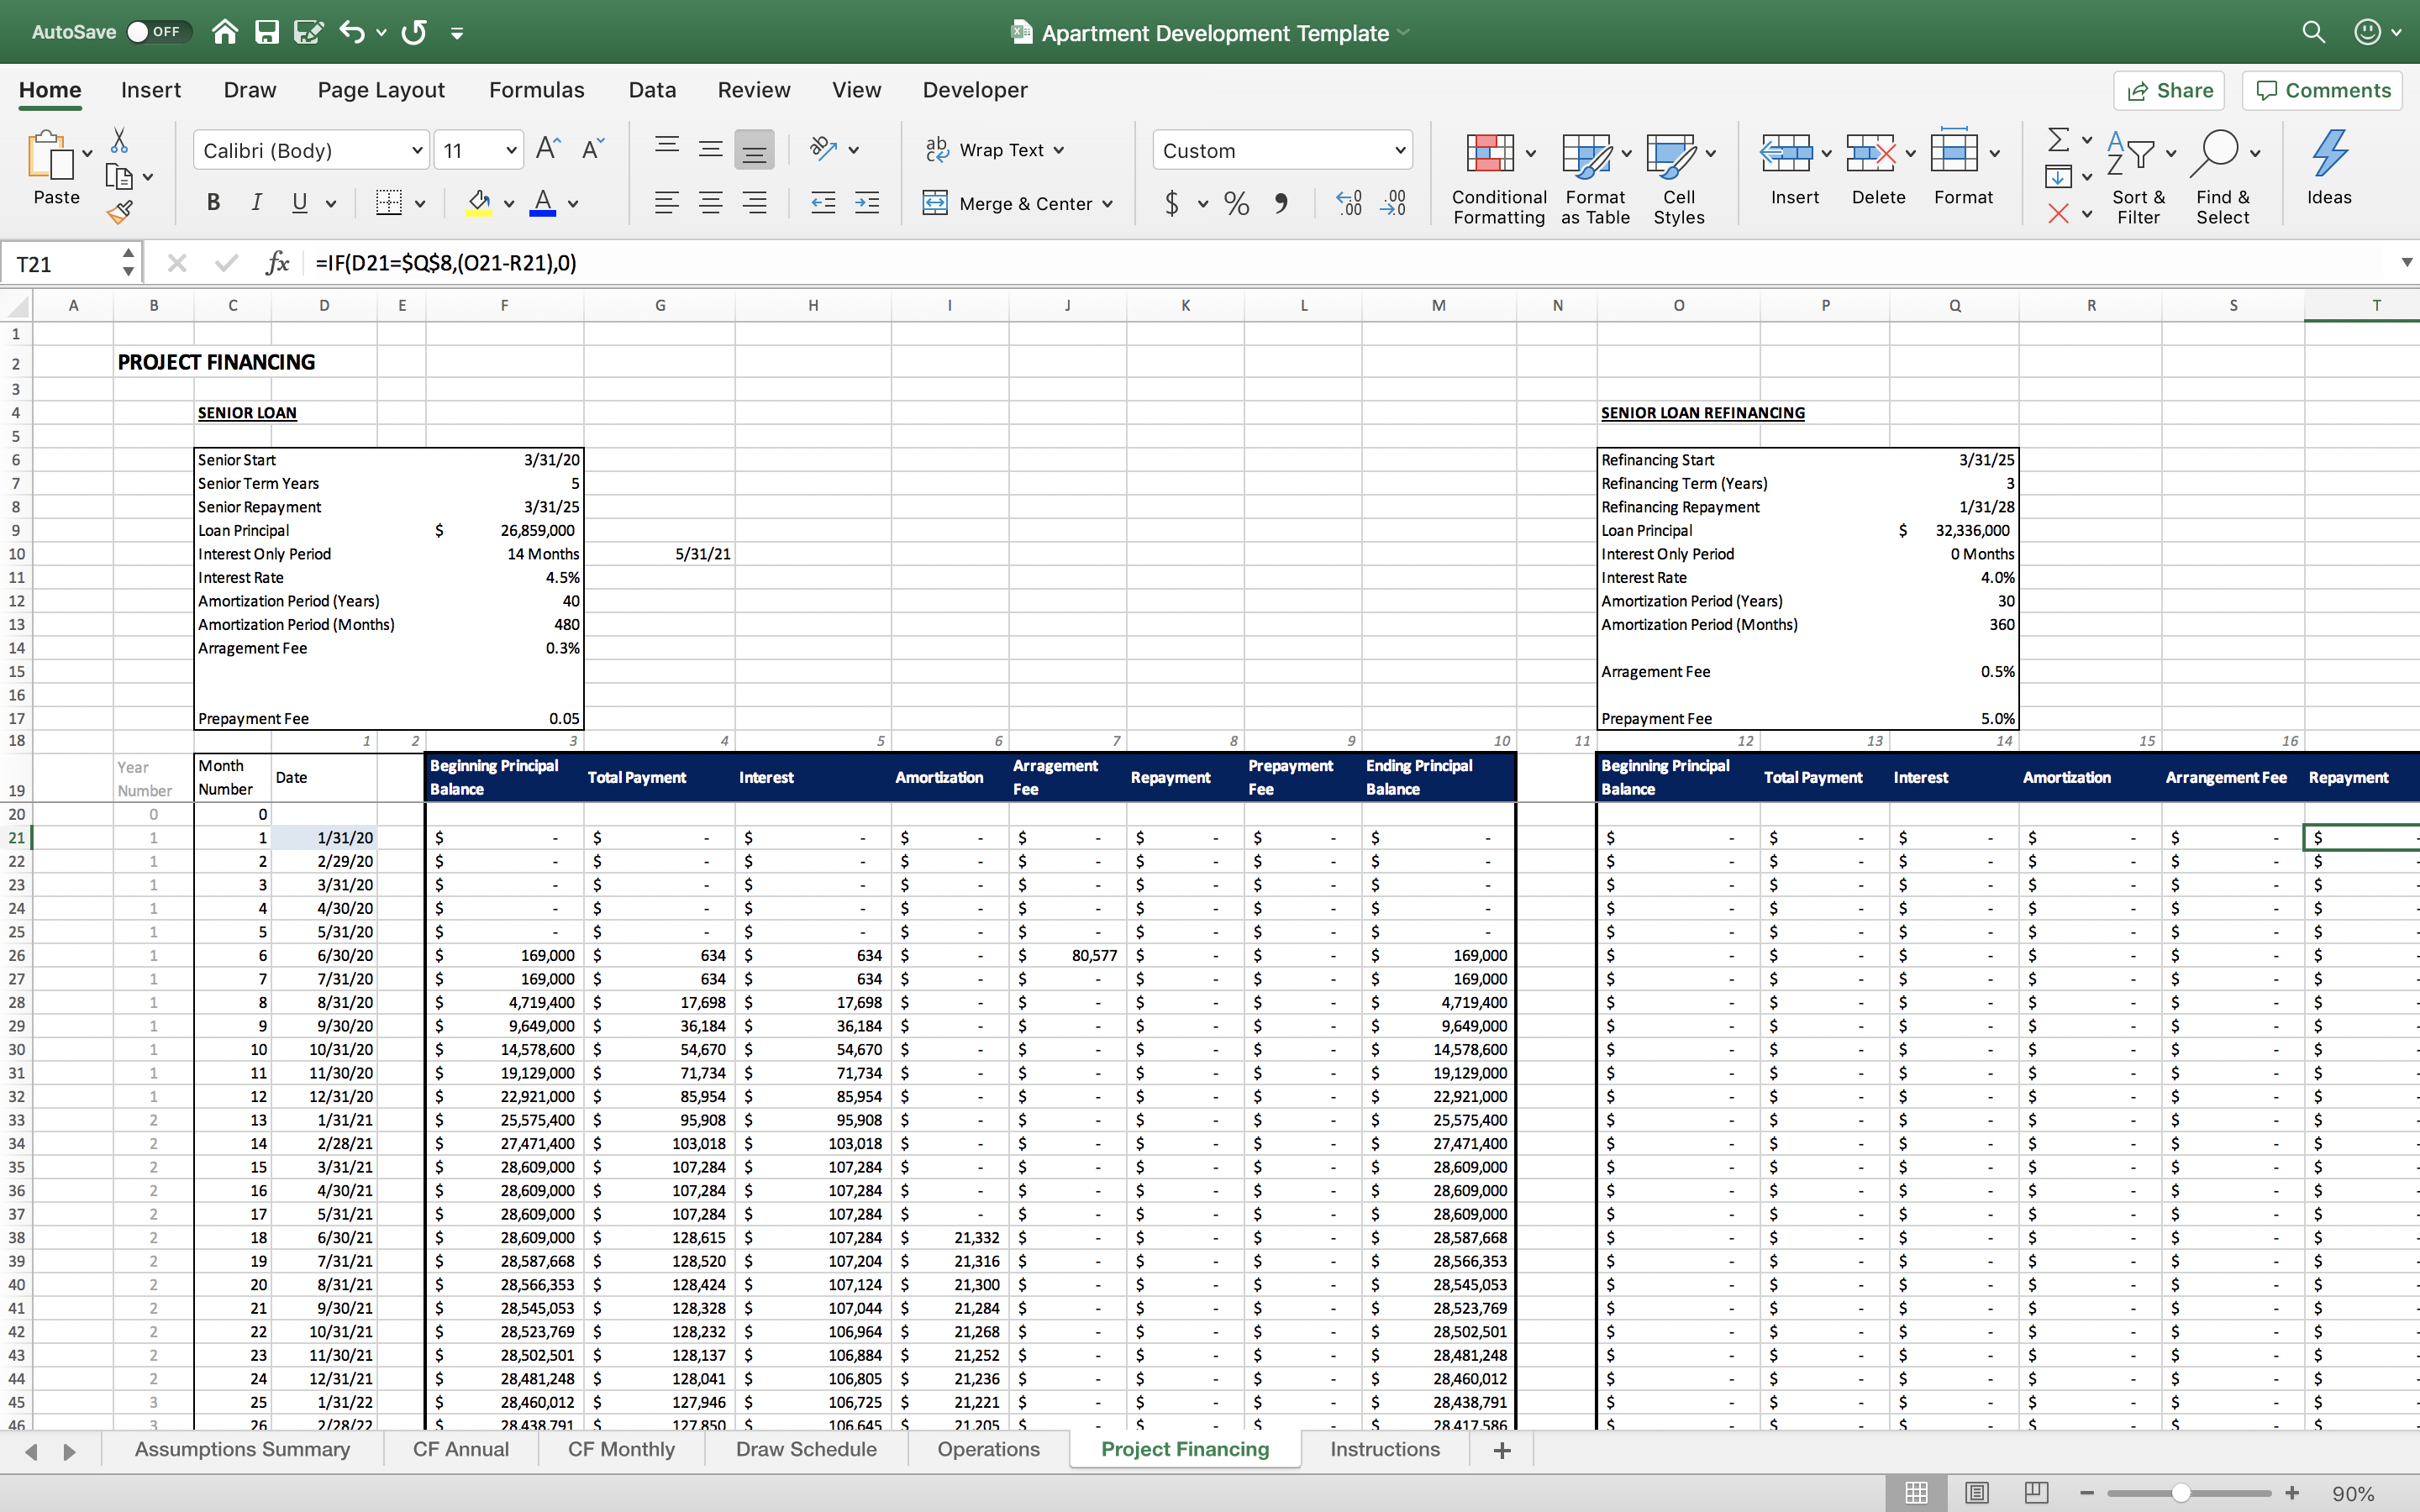  Real Estate Development Pro Forma Template Excel Free 